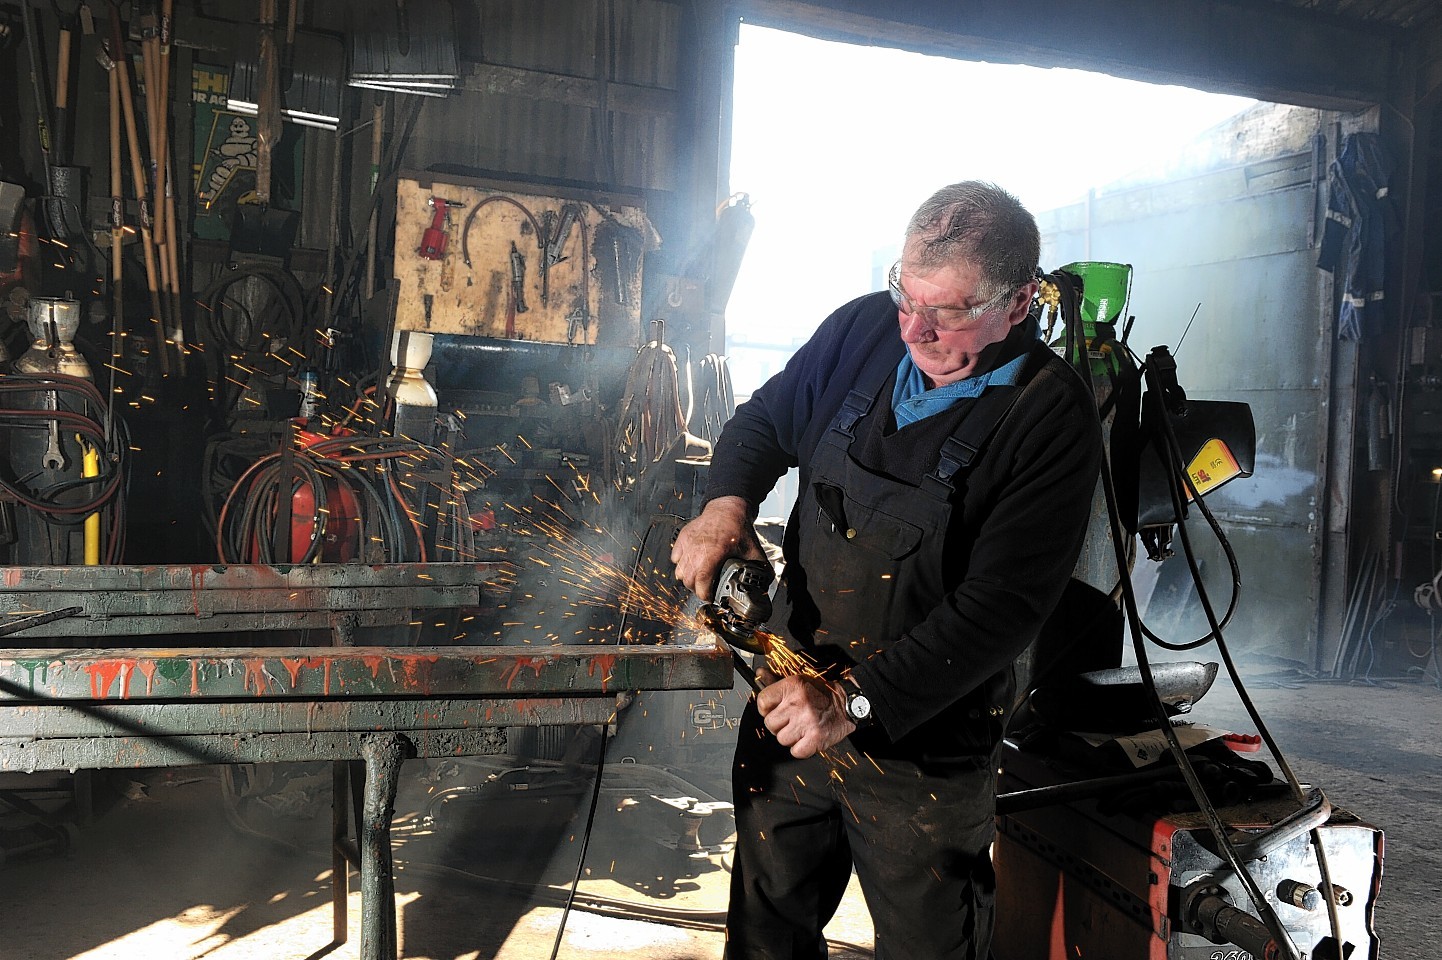 David Forsyth from St Combs who has been working as an agricultural engineer and blacksmith for 50 years.